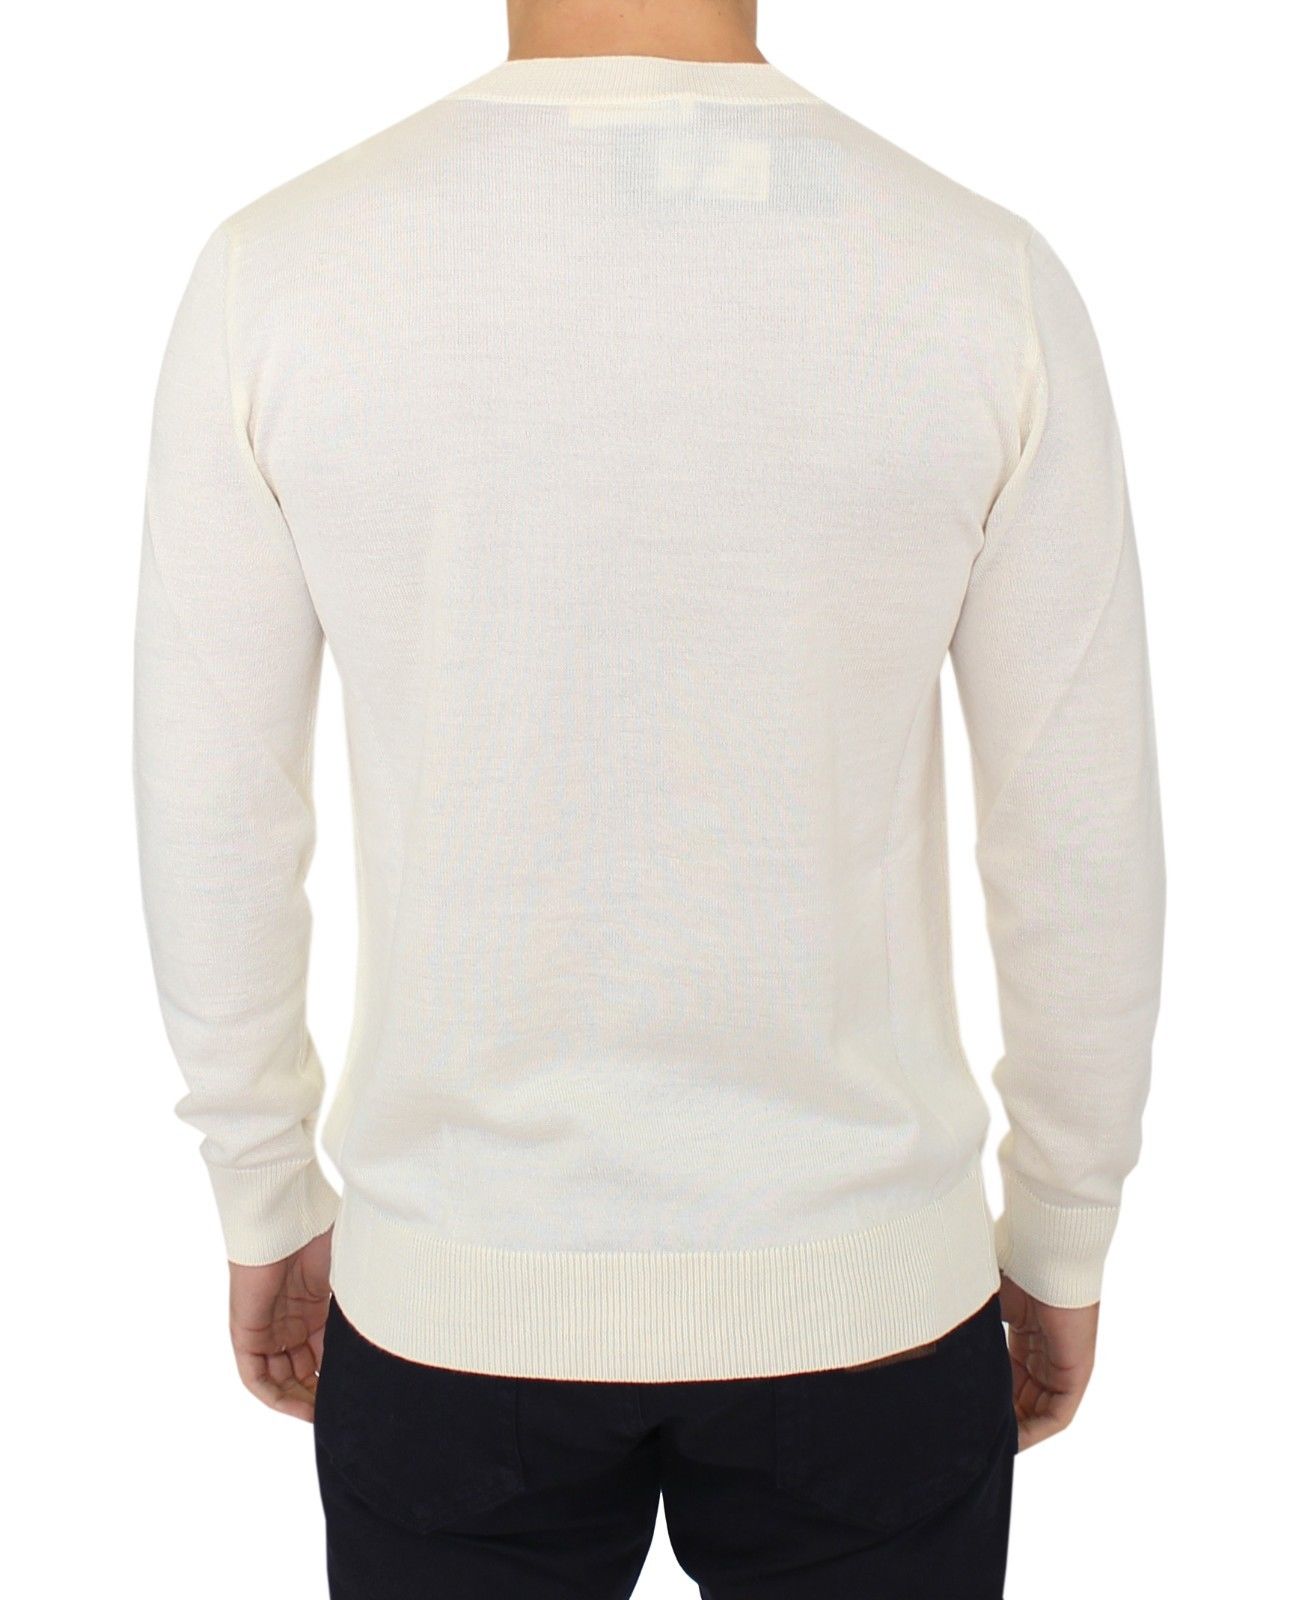 Off White Wool Blend V-neck Pullover Sweater designed by Ermanno Scervino available from Moon Behind The Hill's Men's Clothing range